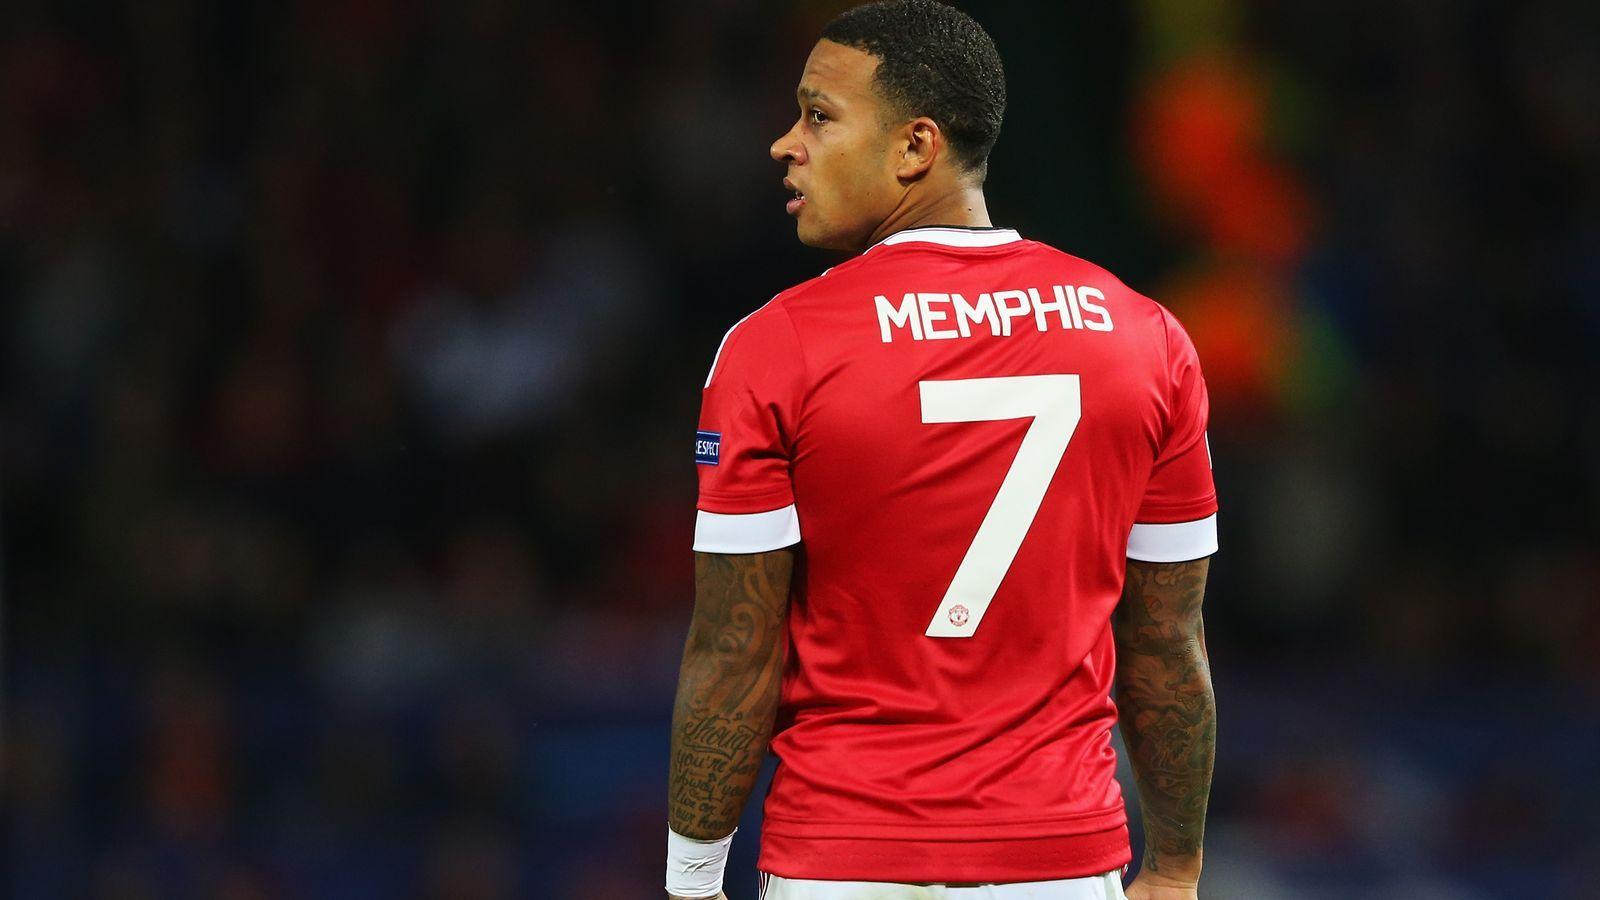 Memphis Depay Wallpaper High Resolution and Quality Download